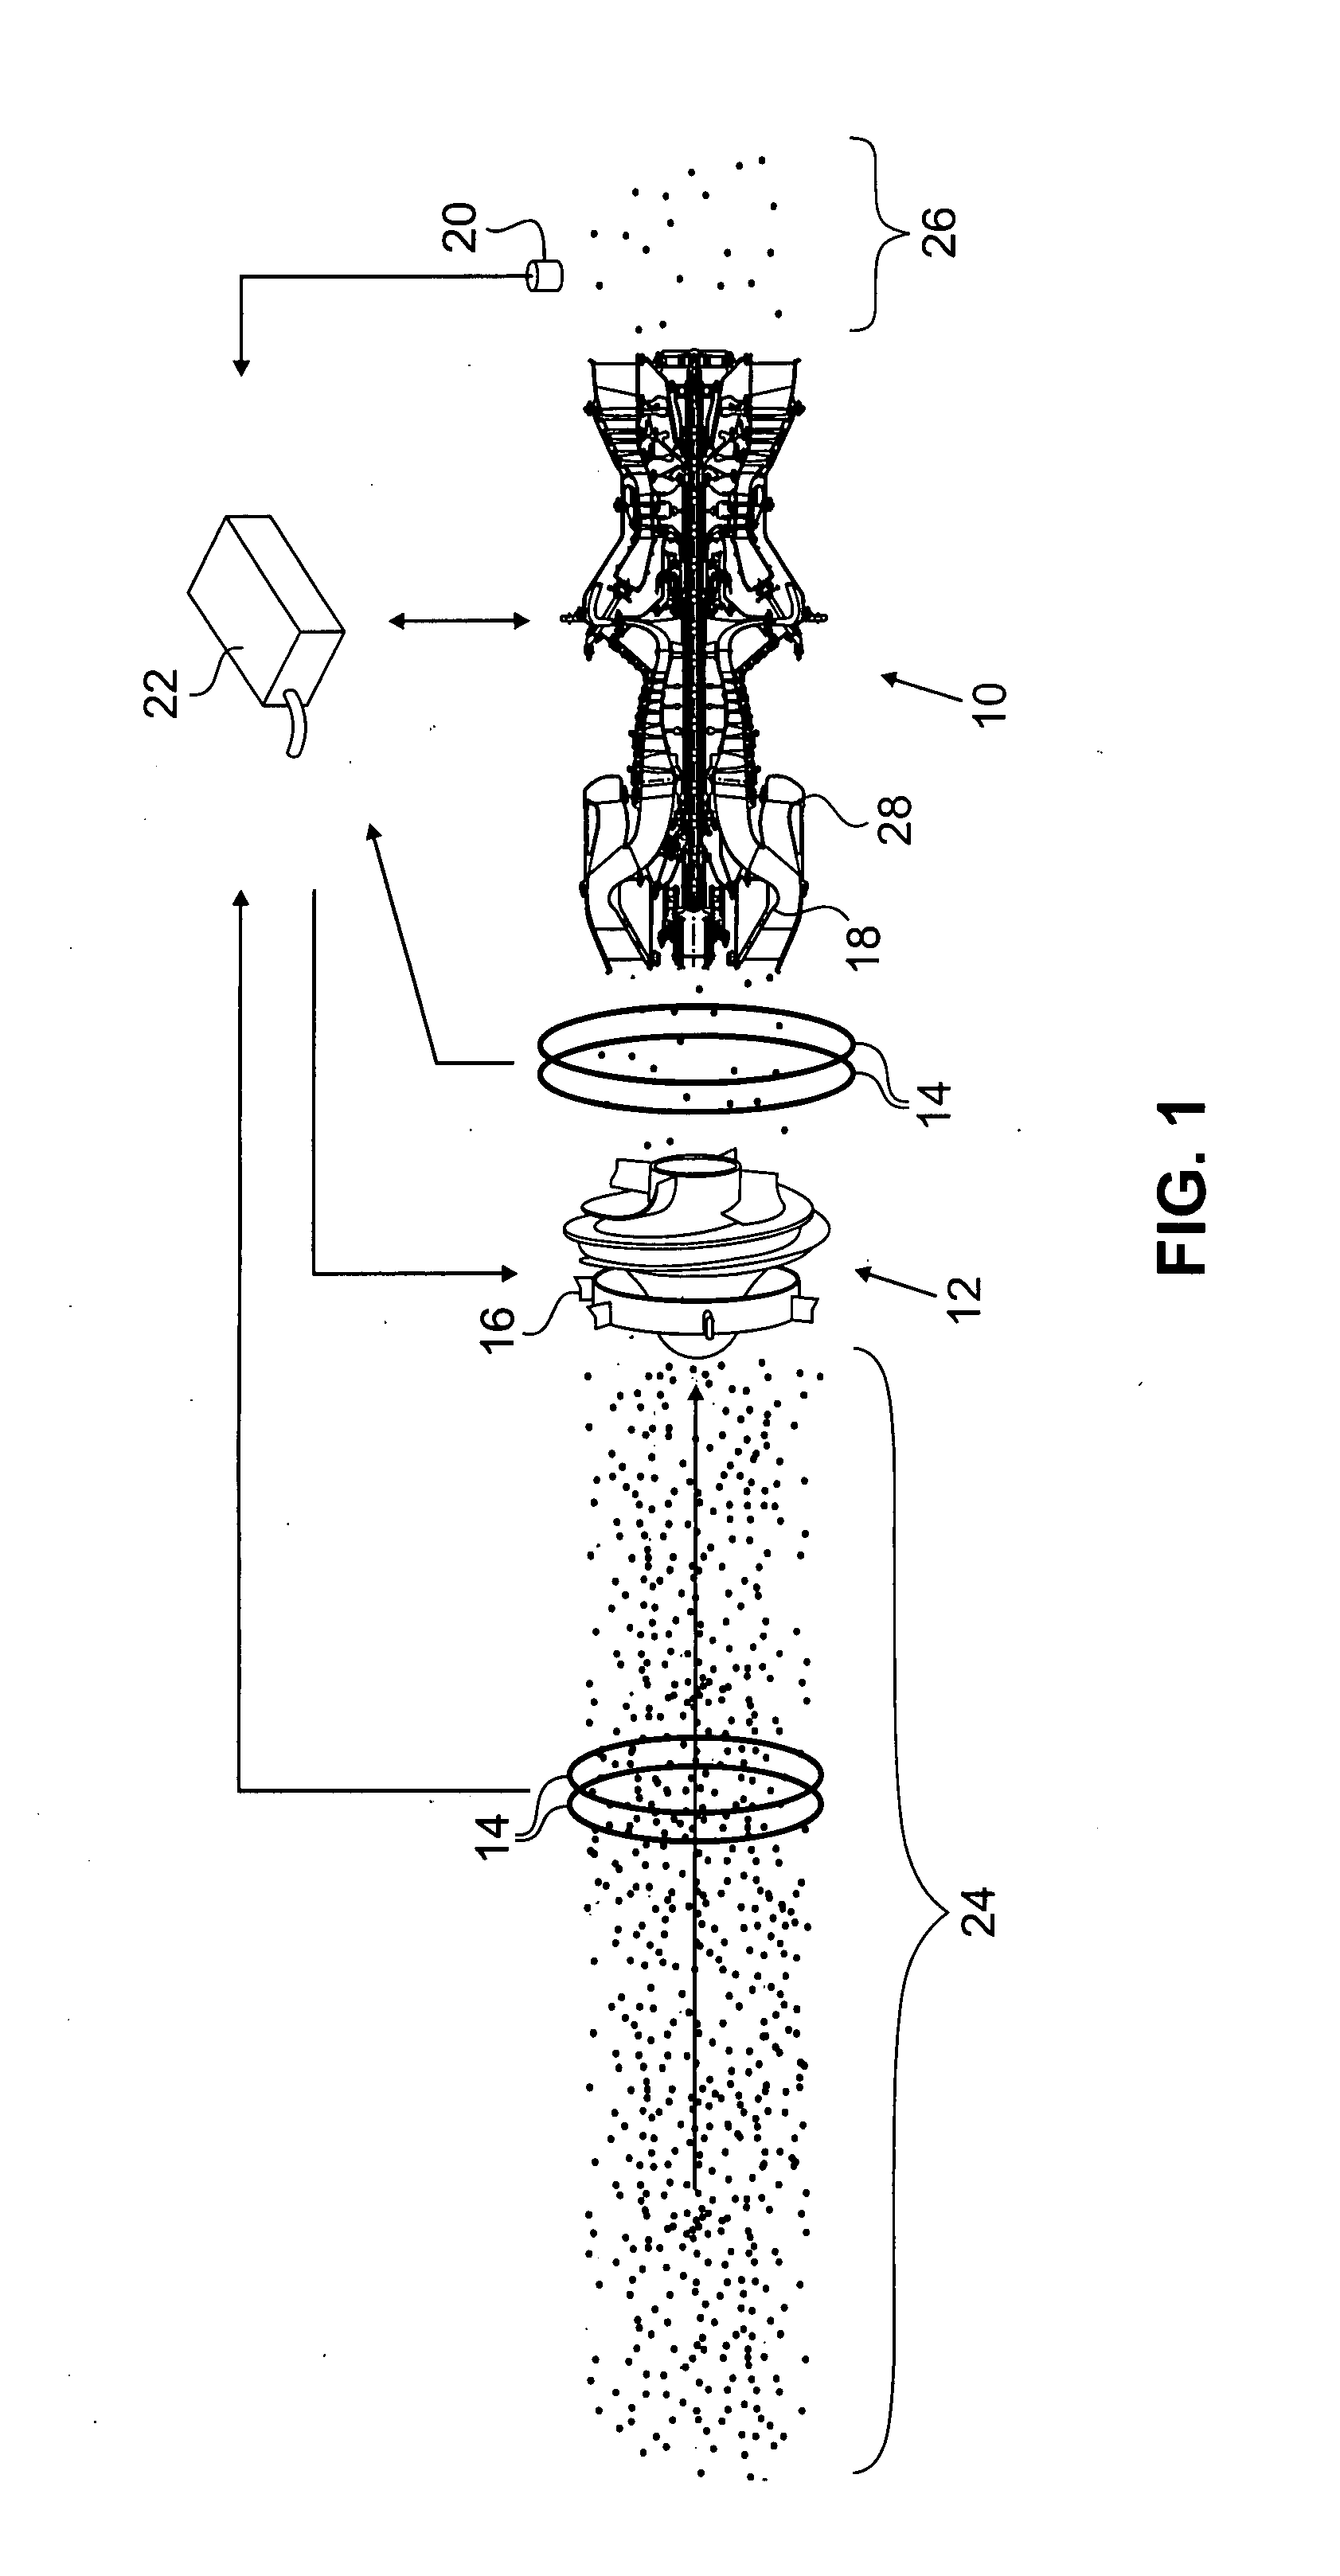 Particle separator and debris control system